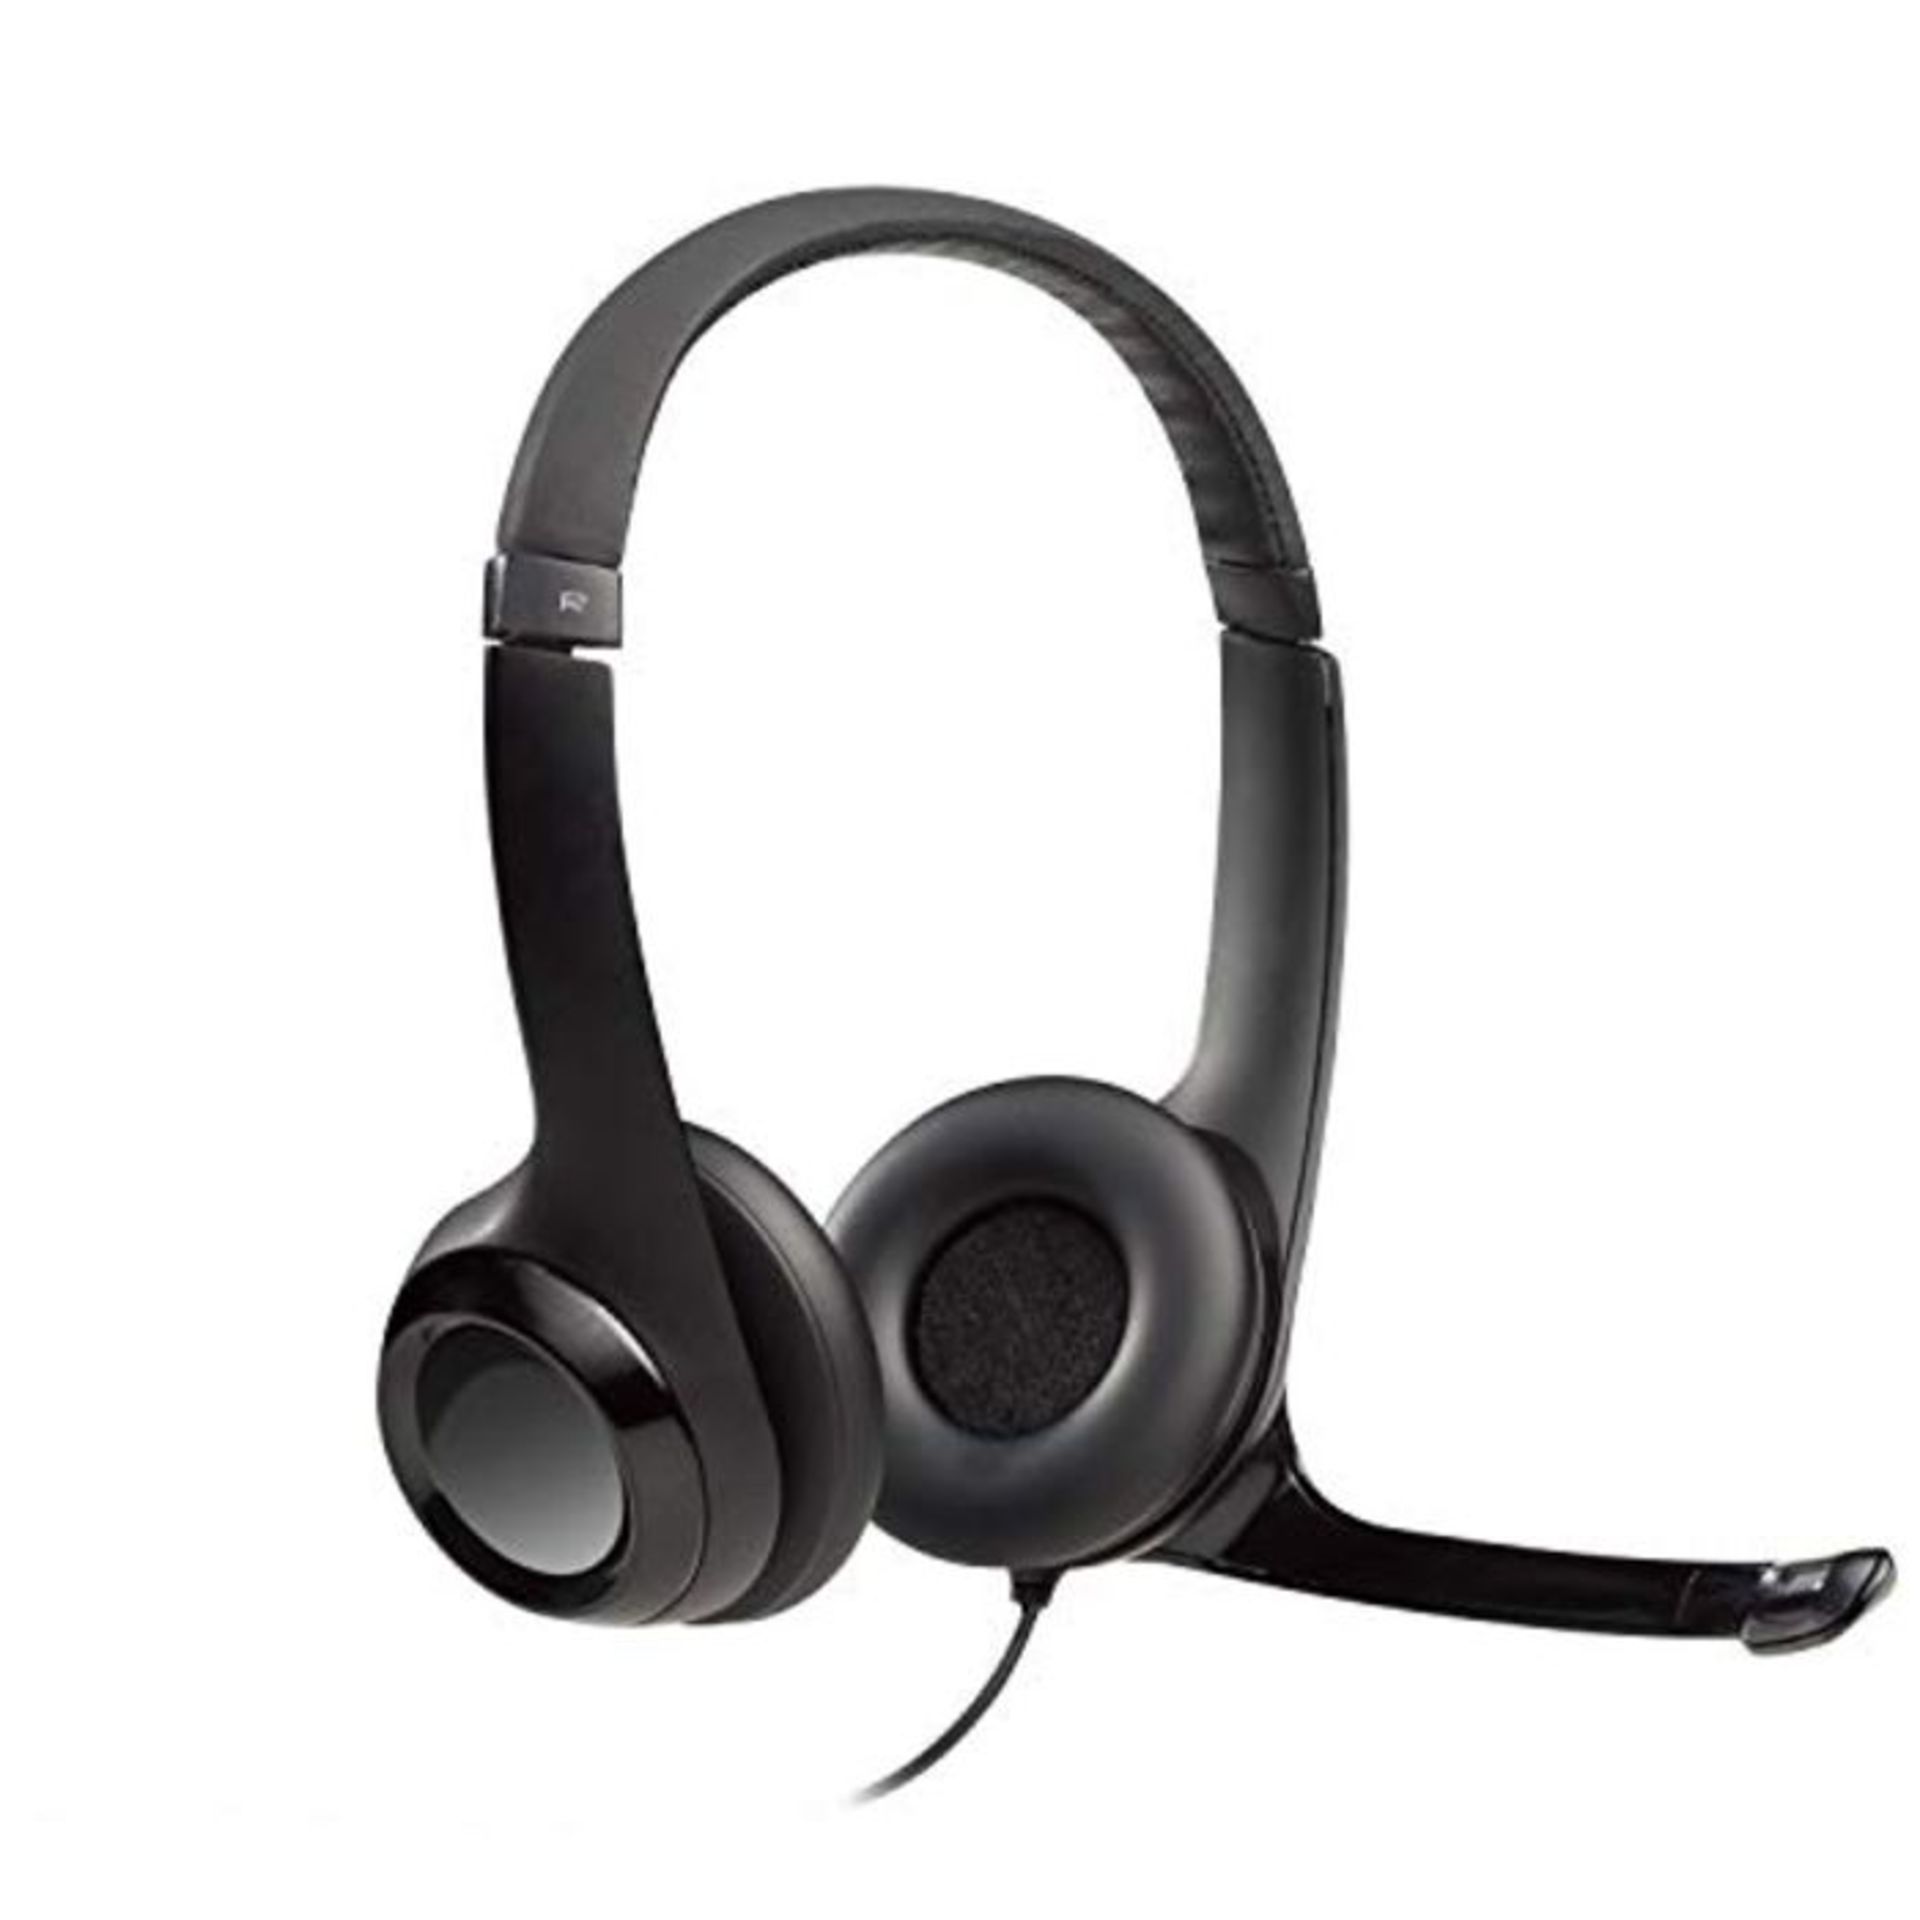 Logitech H390 Wired Headset, Stereo Headphones with Noise-Cancelling Microphone, USB, - Image 2 of 4